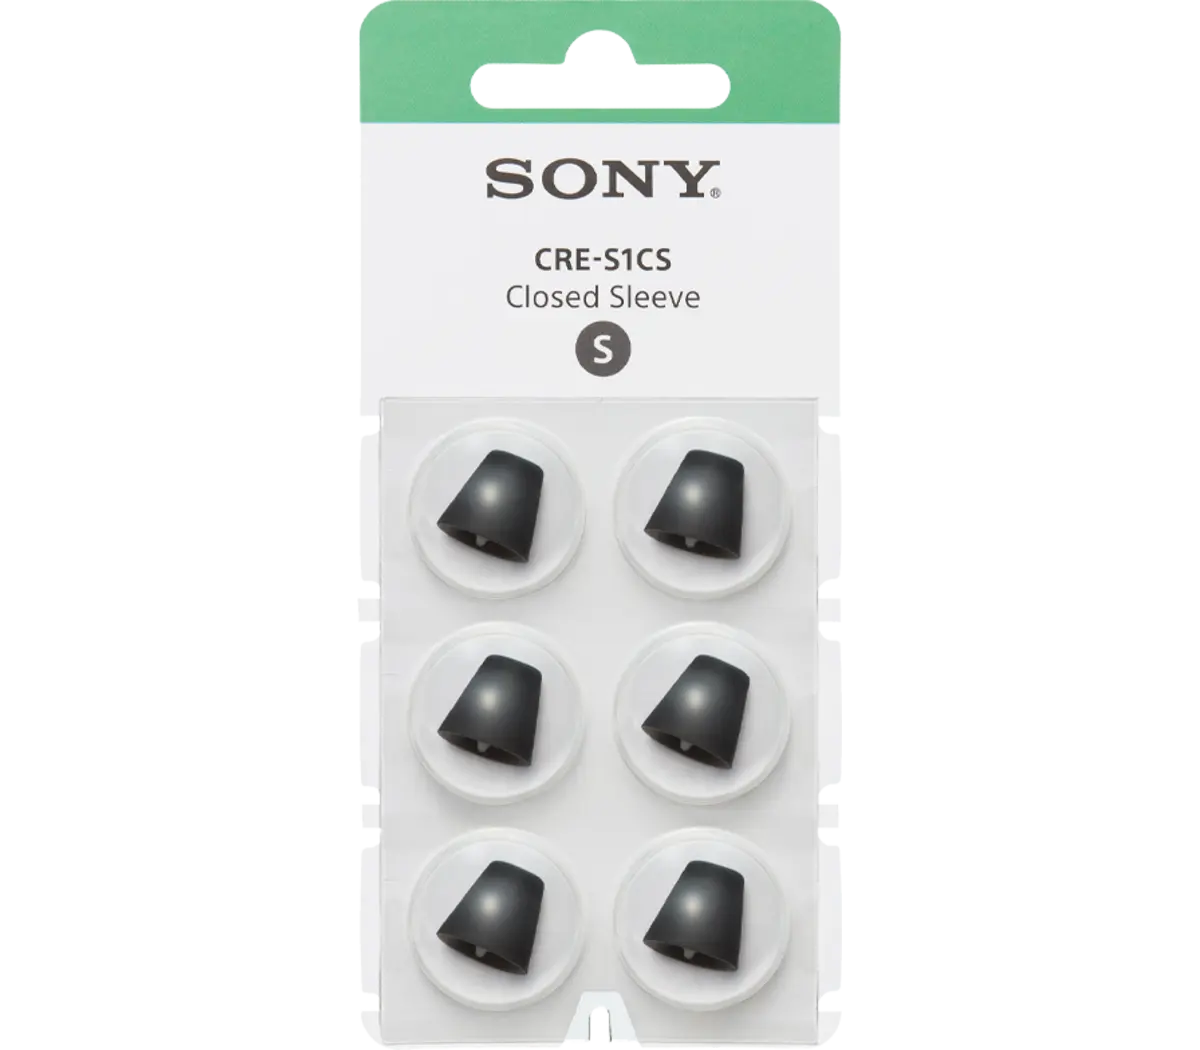 Sony Closed Sleeves, Small for OTC Hearing Aids | CRE-S1CS